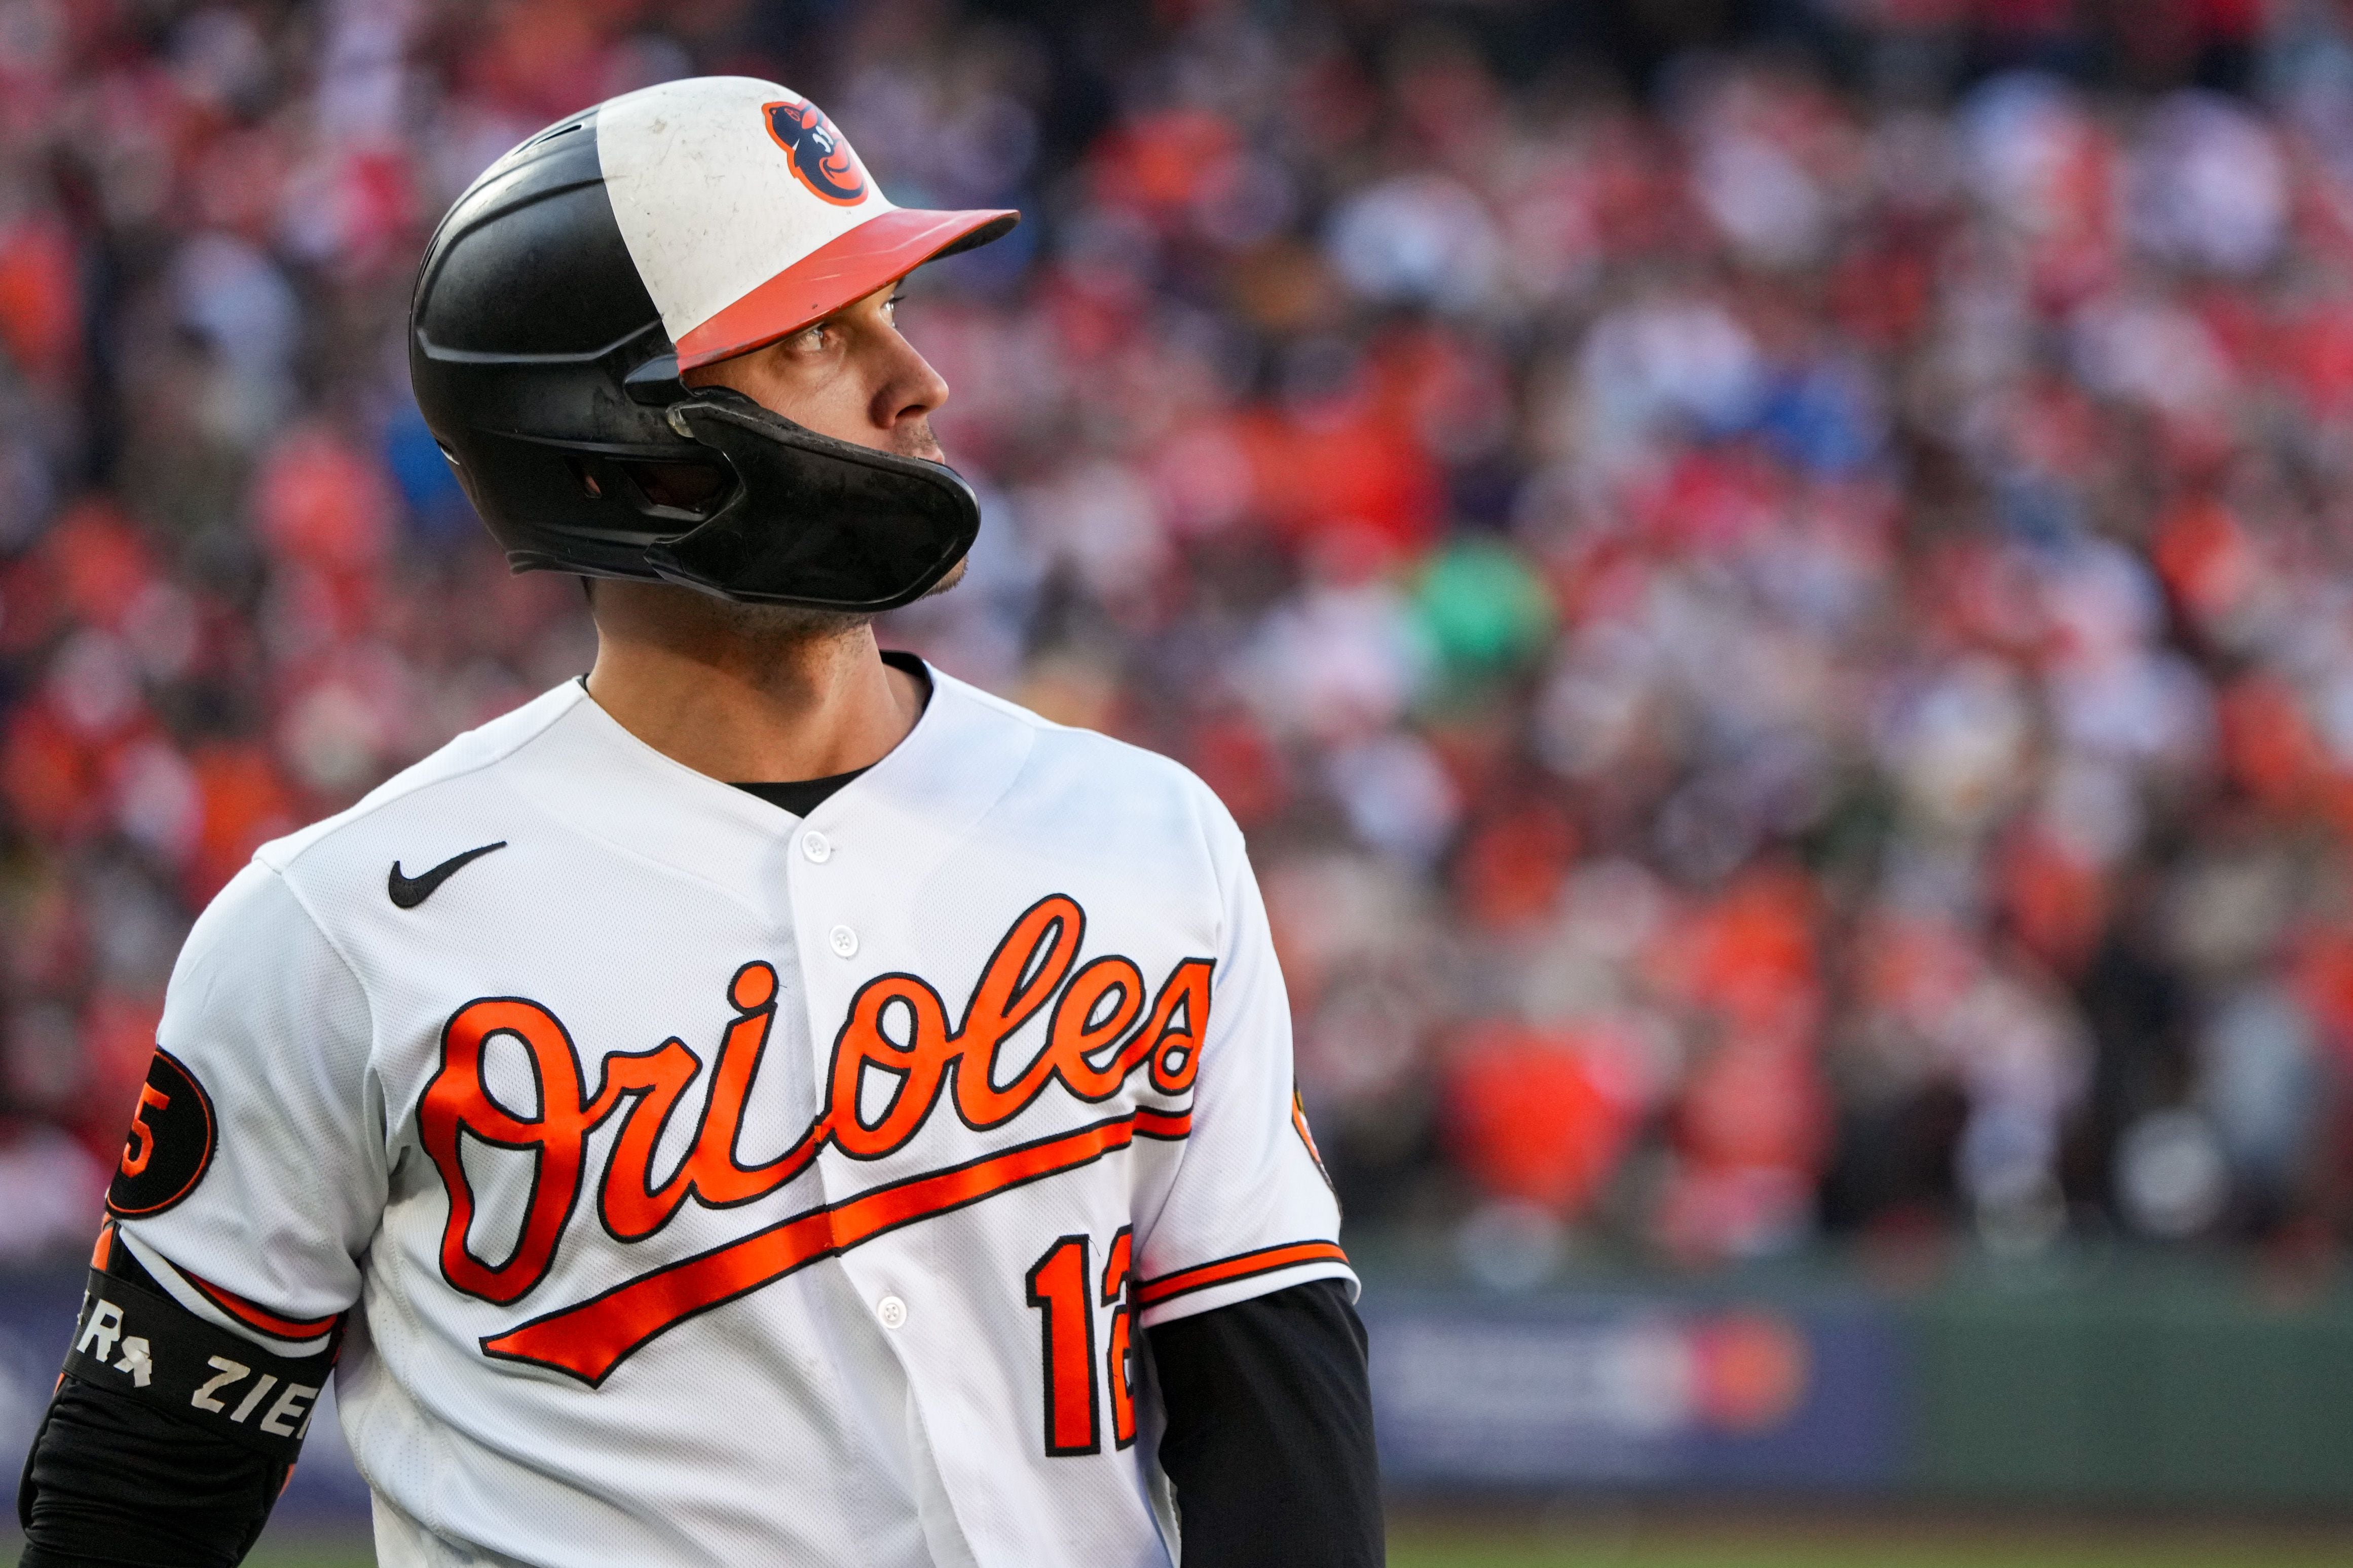 Orioles overcome missed opportunities, squeak out 1-0 win over